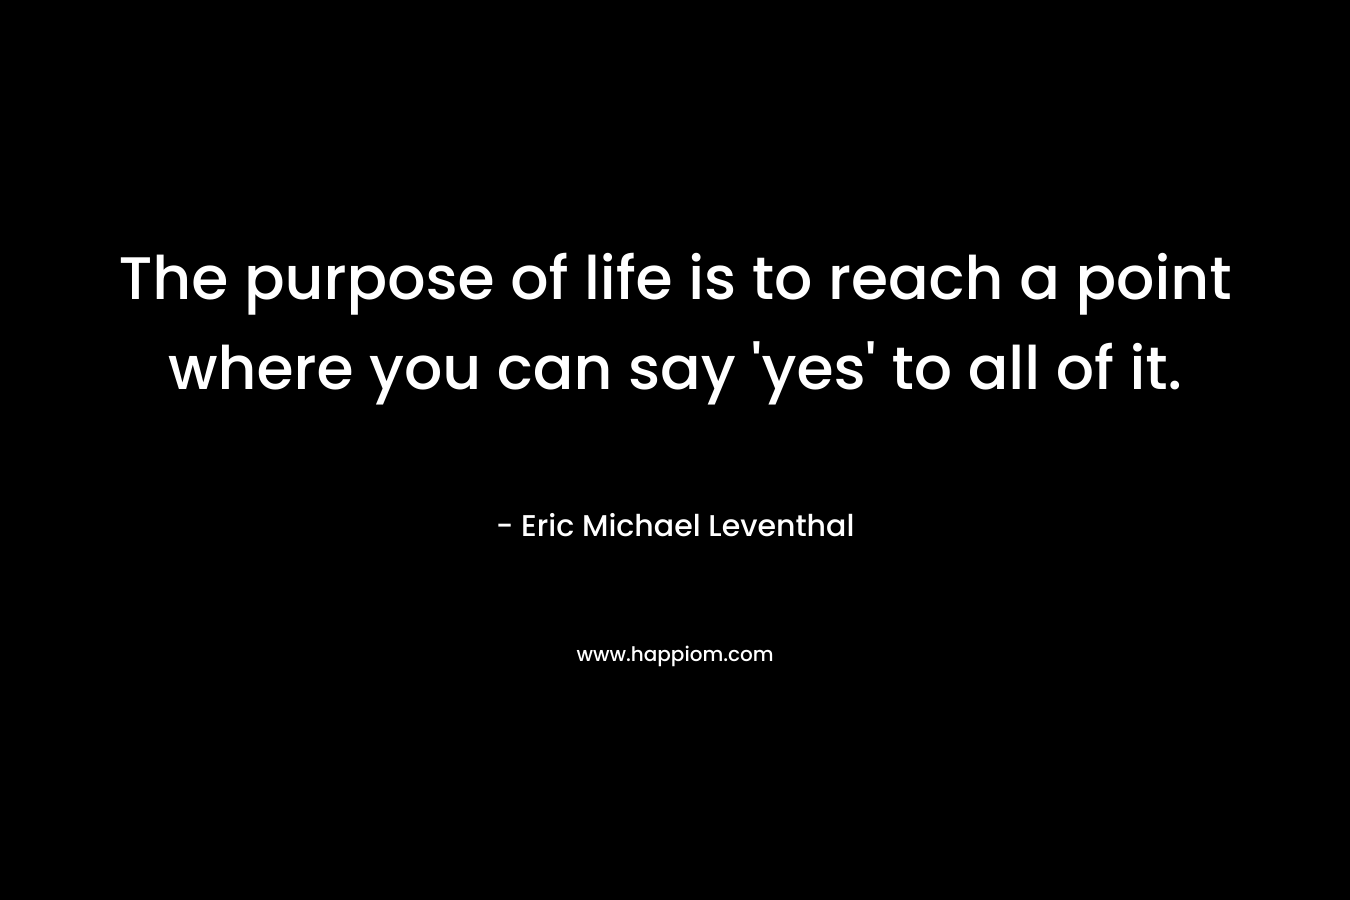 The purpose of life is to reach a point where you can say 'yes' to all of it.